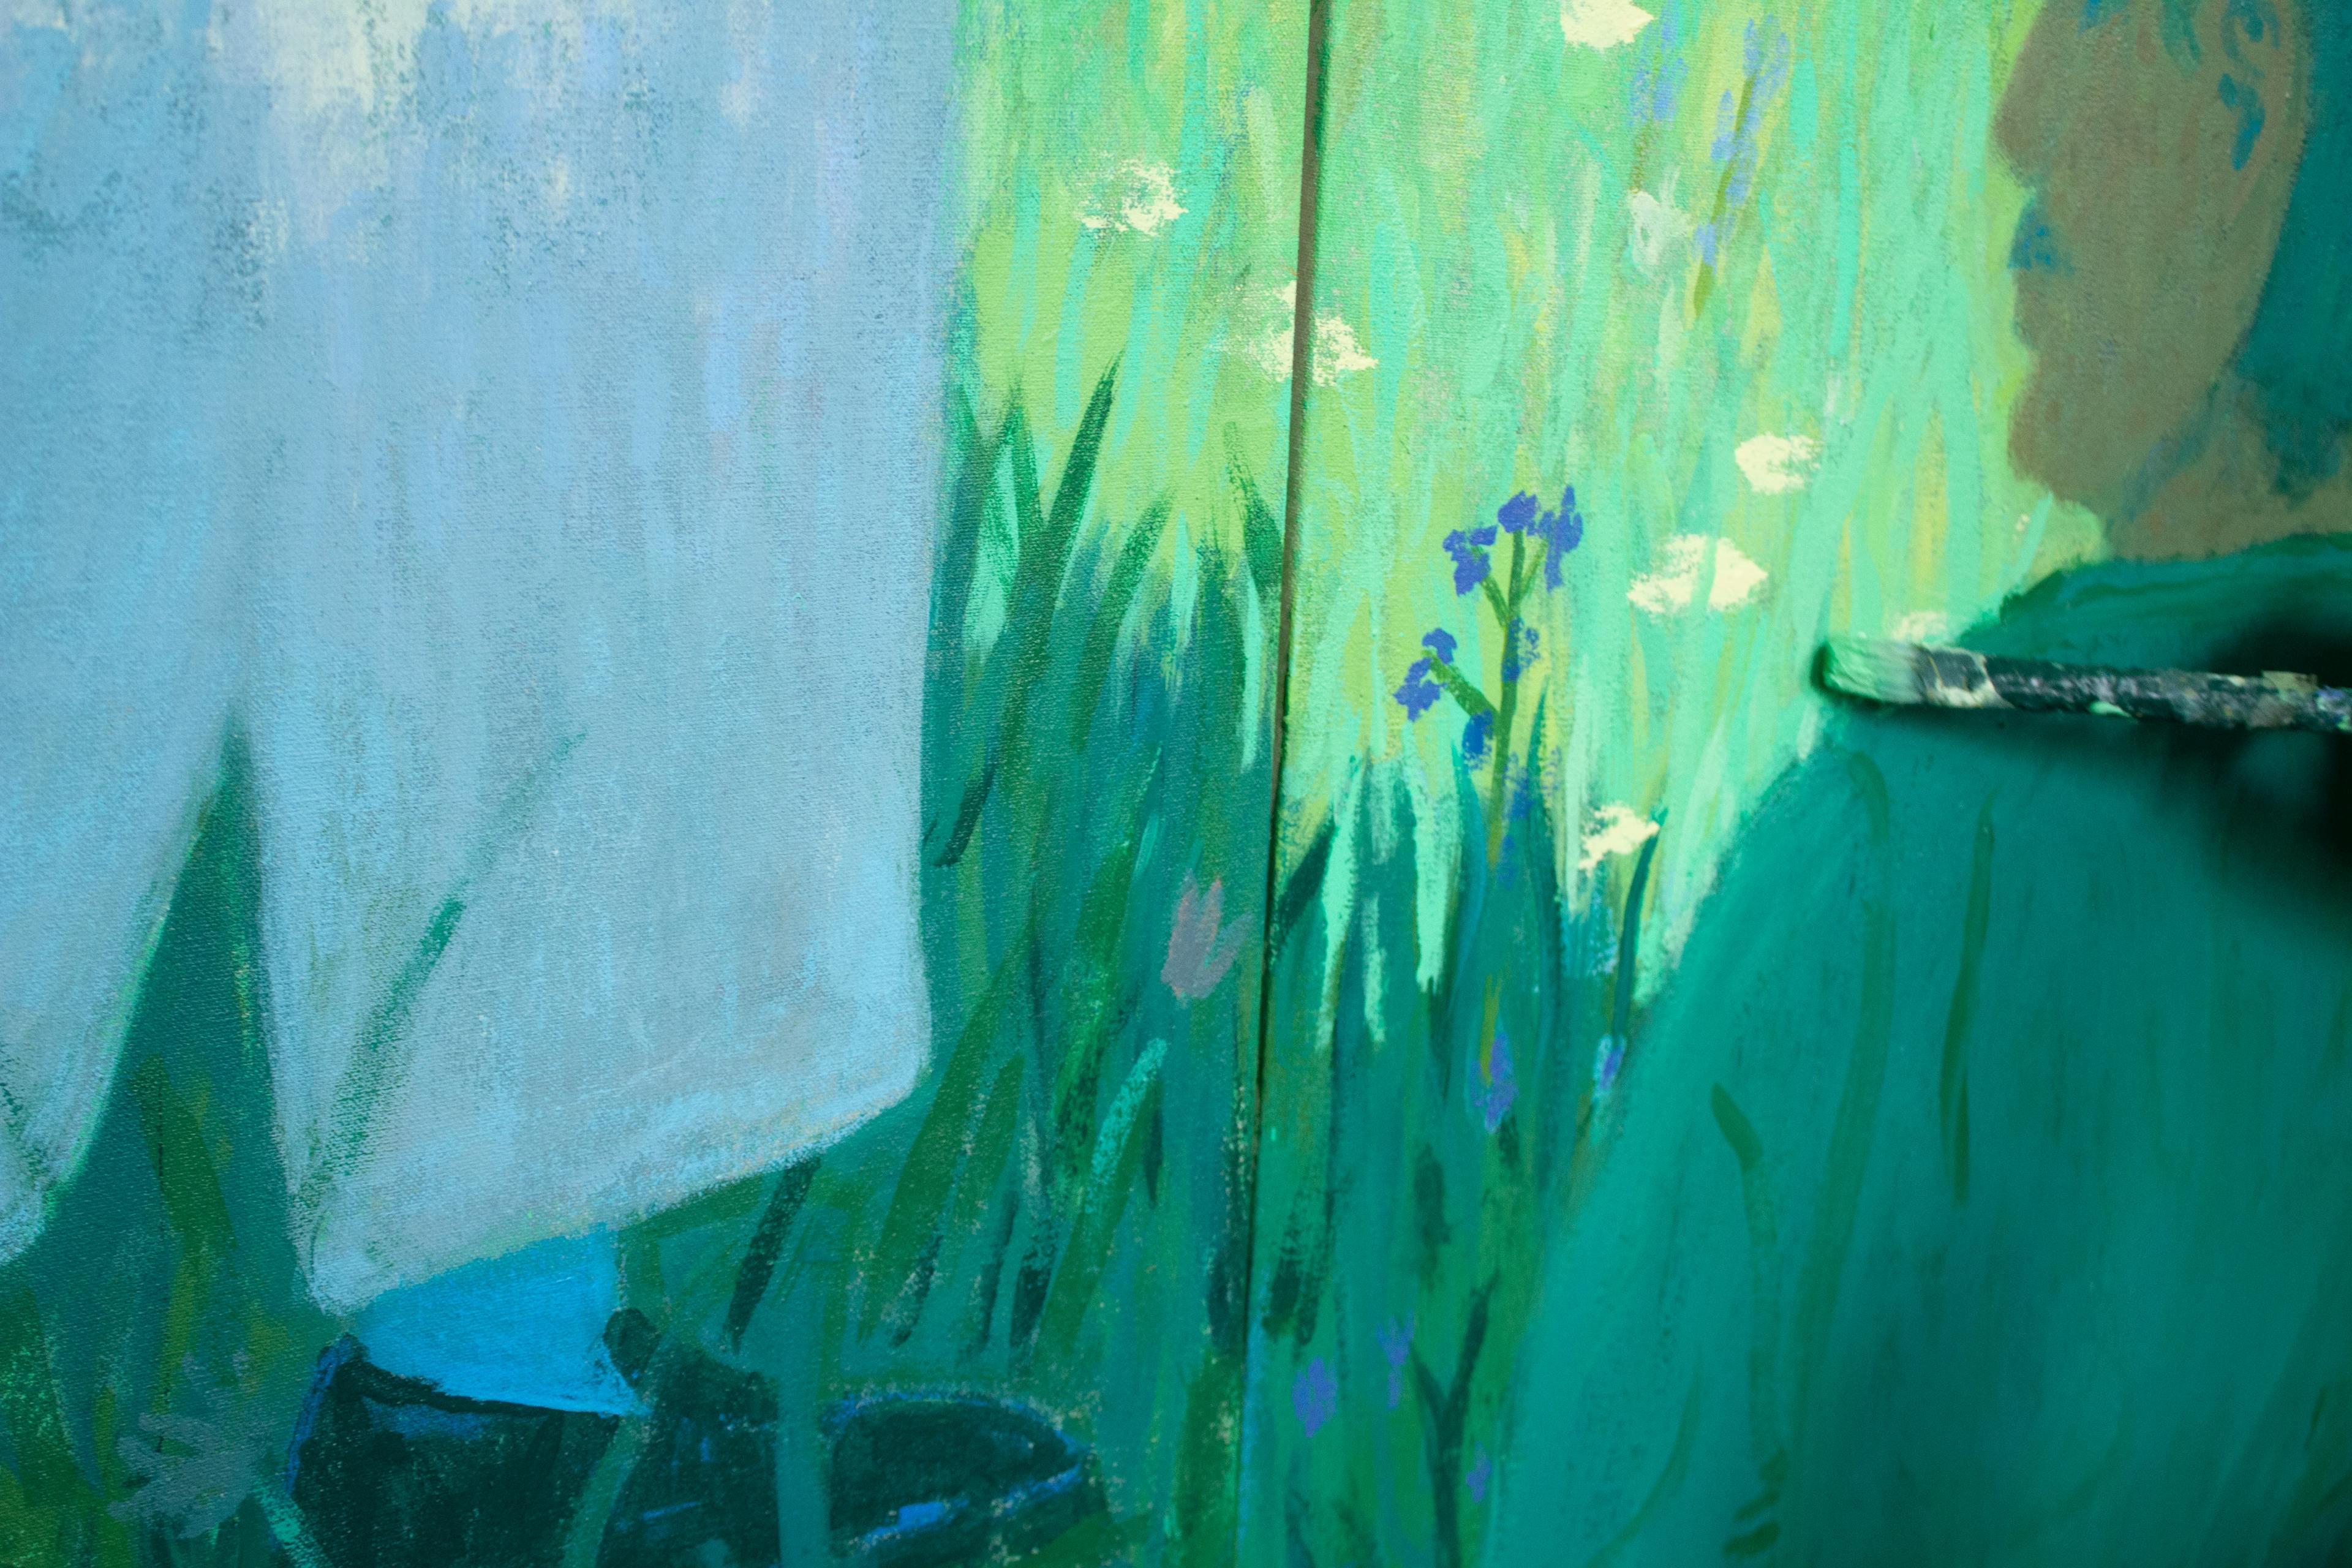 A close-up of artist Jackson Joyce painting figures in a grassy field.